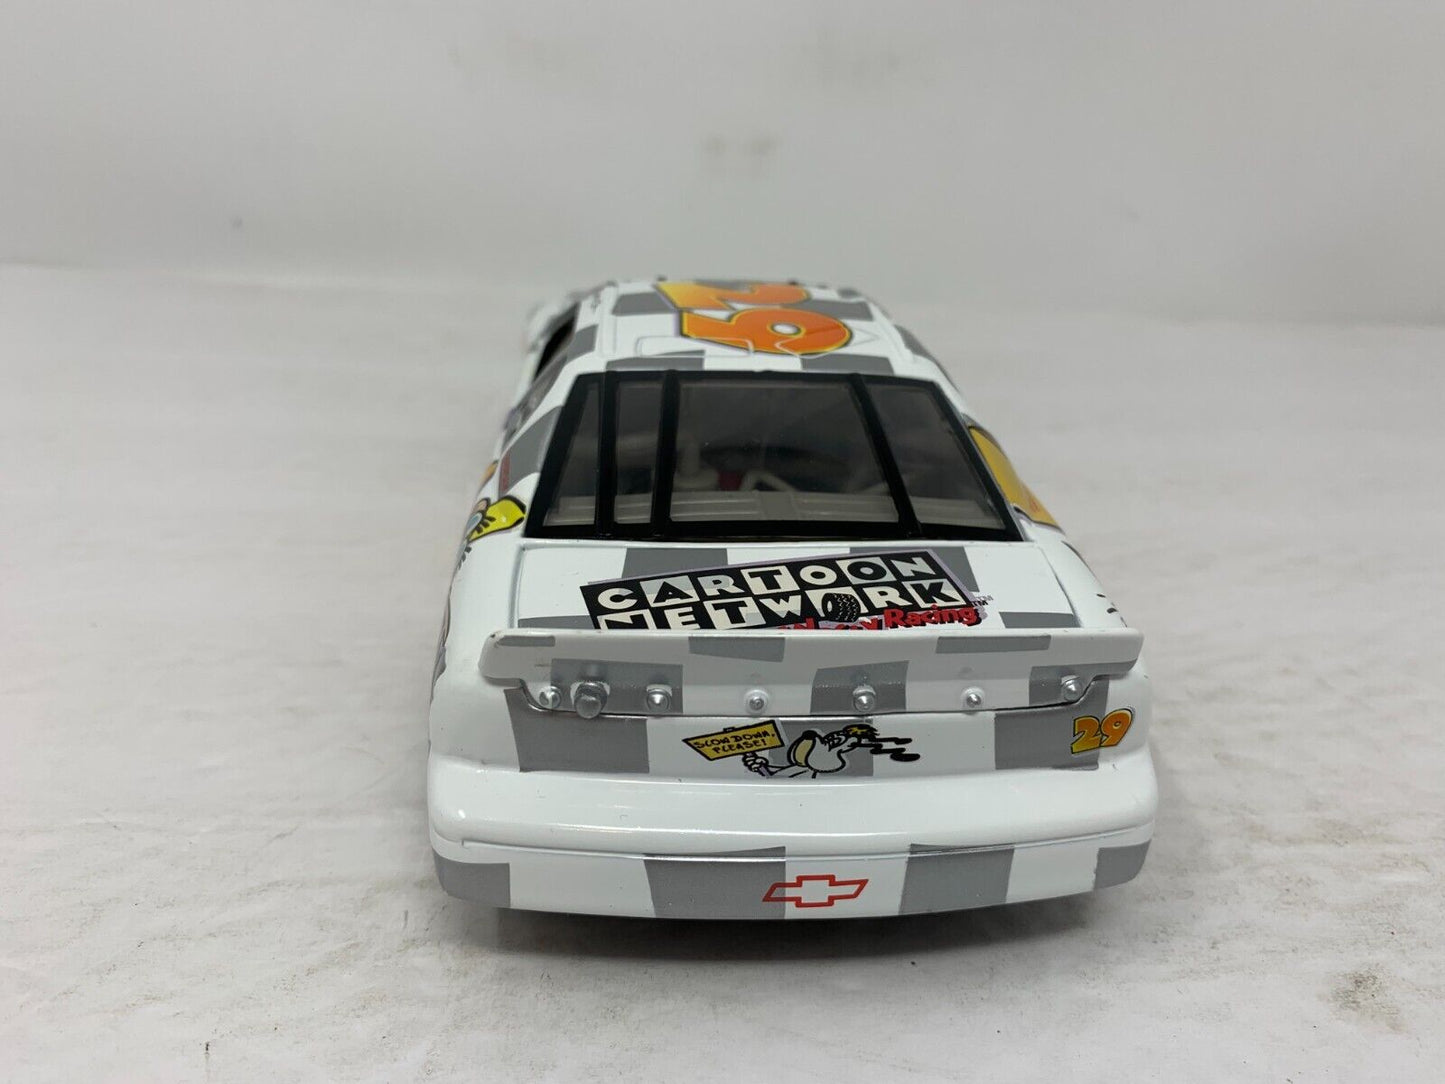 Action Nascar #29 Jeff Green Tom and Jerry 1997 Monte Carlo 1:24 Diecast